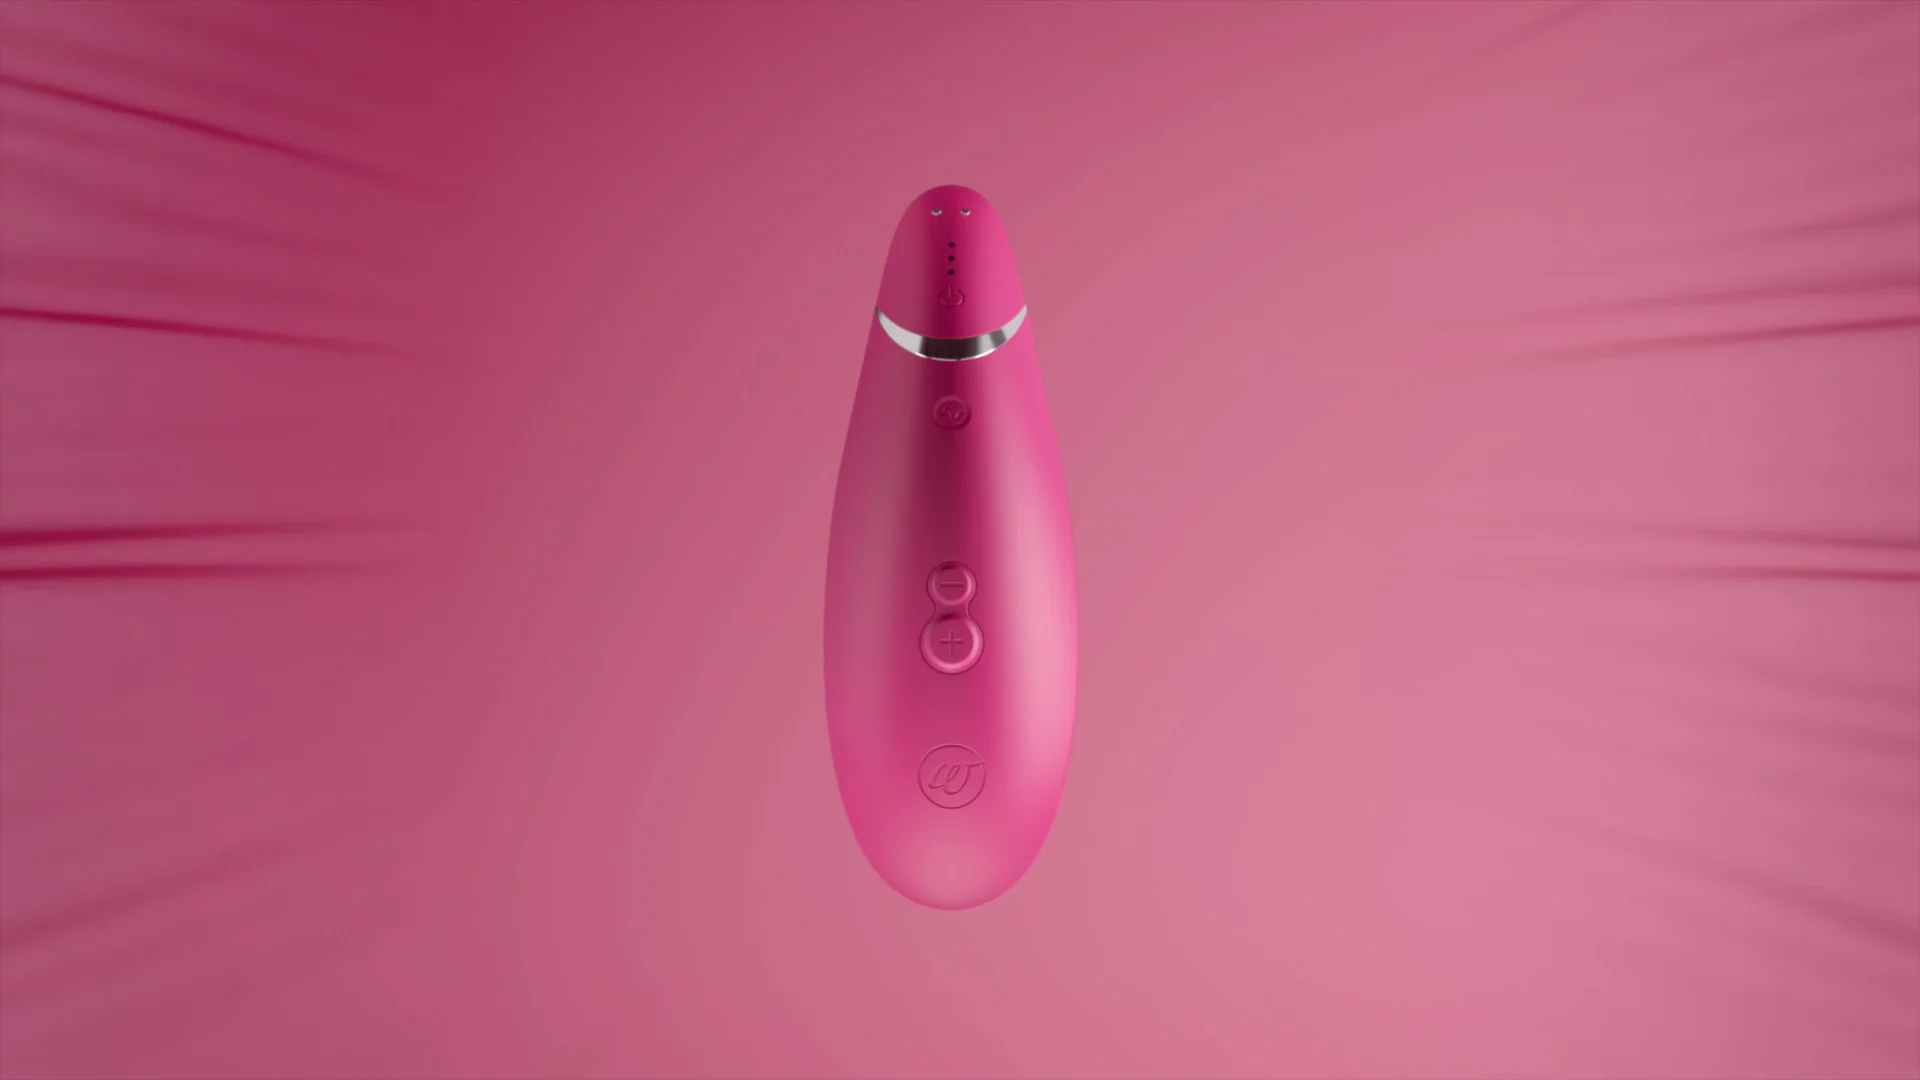 brittany ferland recommends the womanizer toy video pic